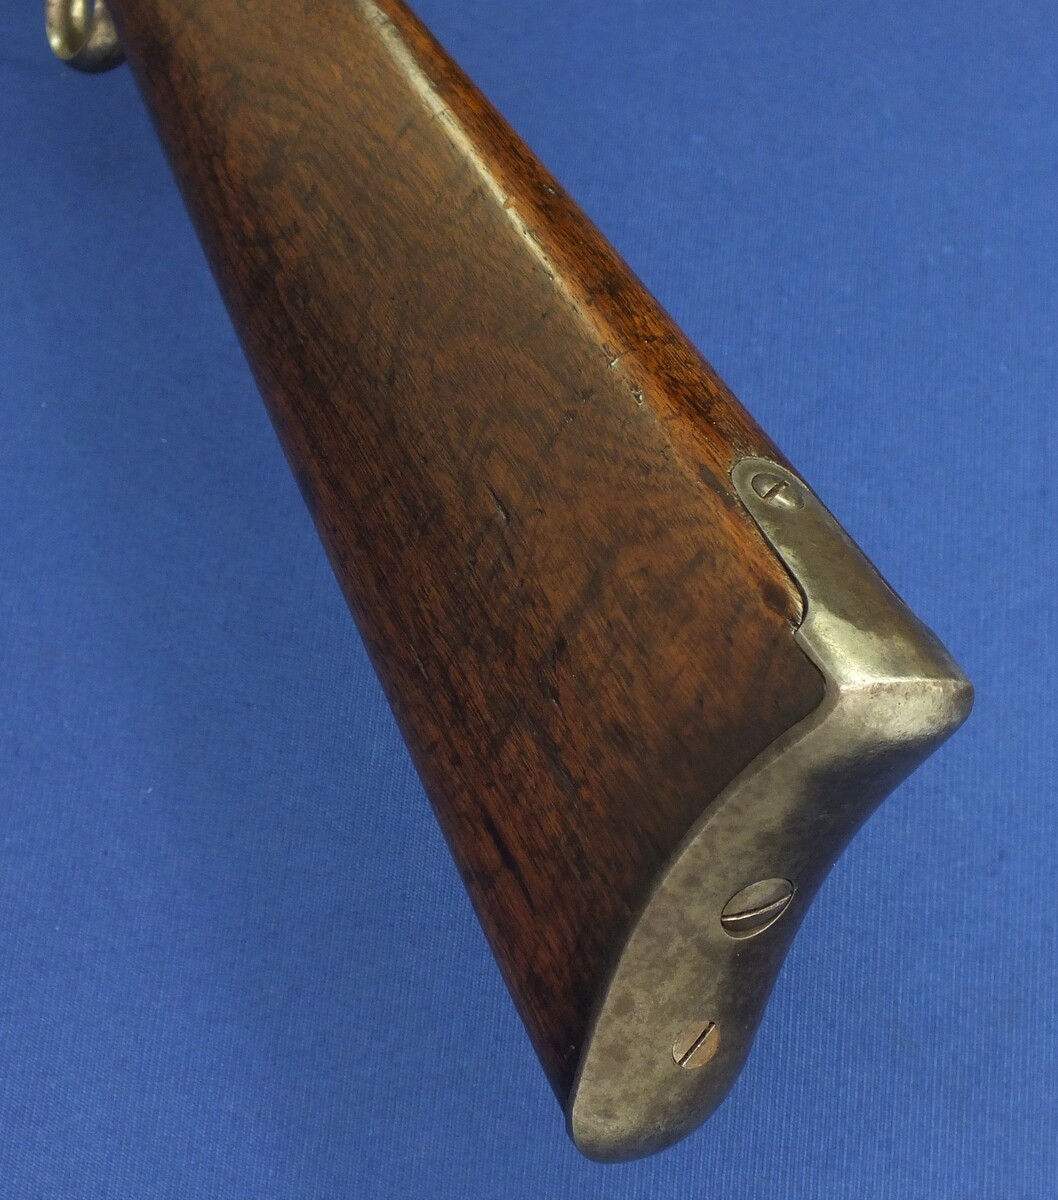 A rare antique American External Extractor Marlin Ballard Hunter's Rifle with reversible Firing-Pin. Caliber 44 Rimfire and Centerfire. 27,5 inch round barrel. Length 110cm. Only 300 made. In very good condition. Price 2.750 euro.